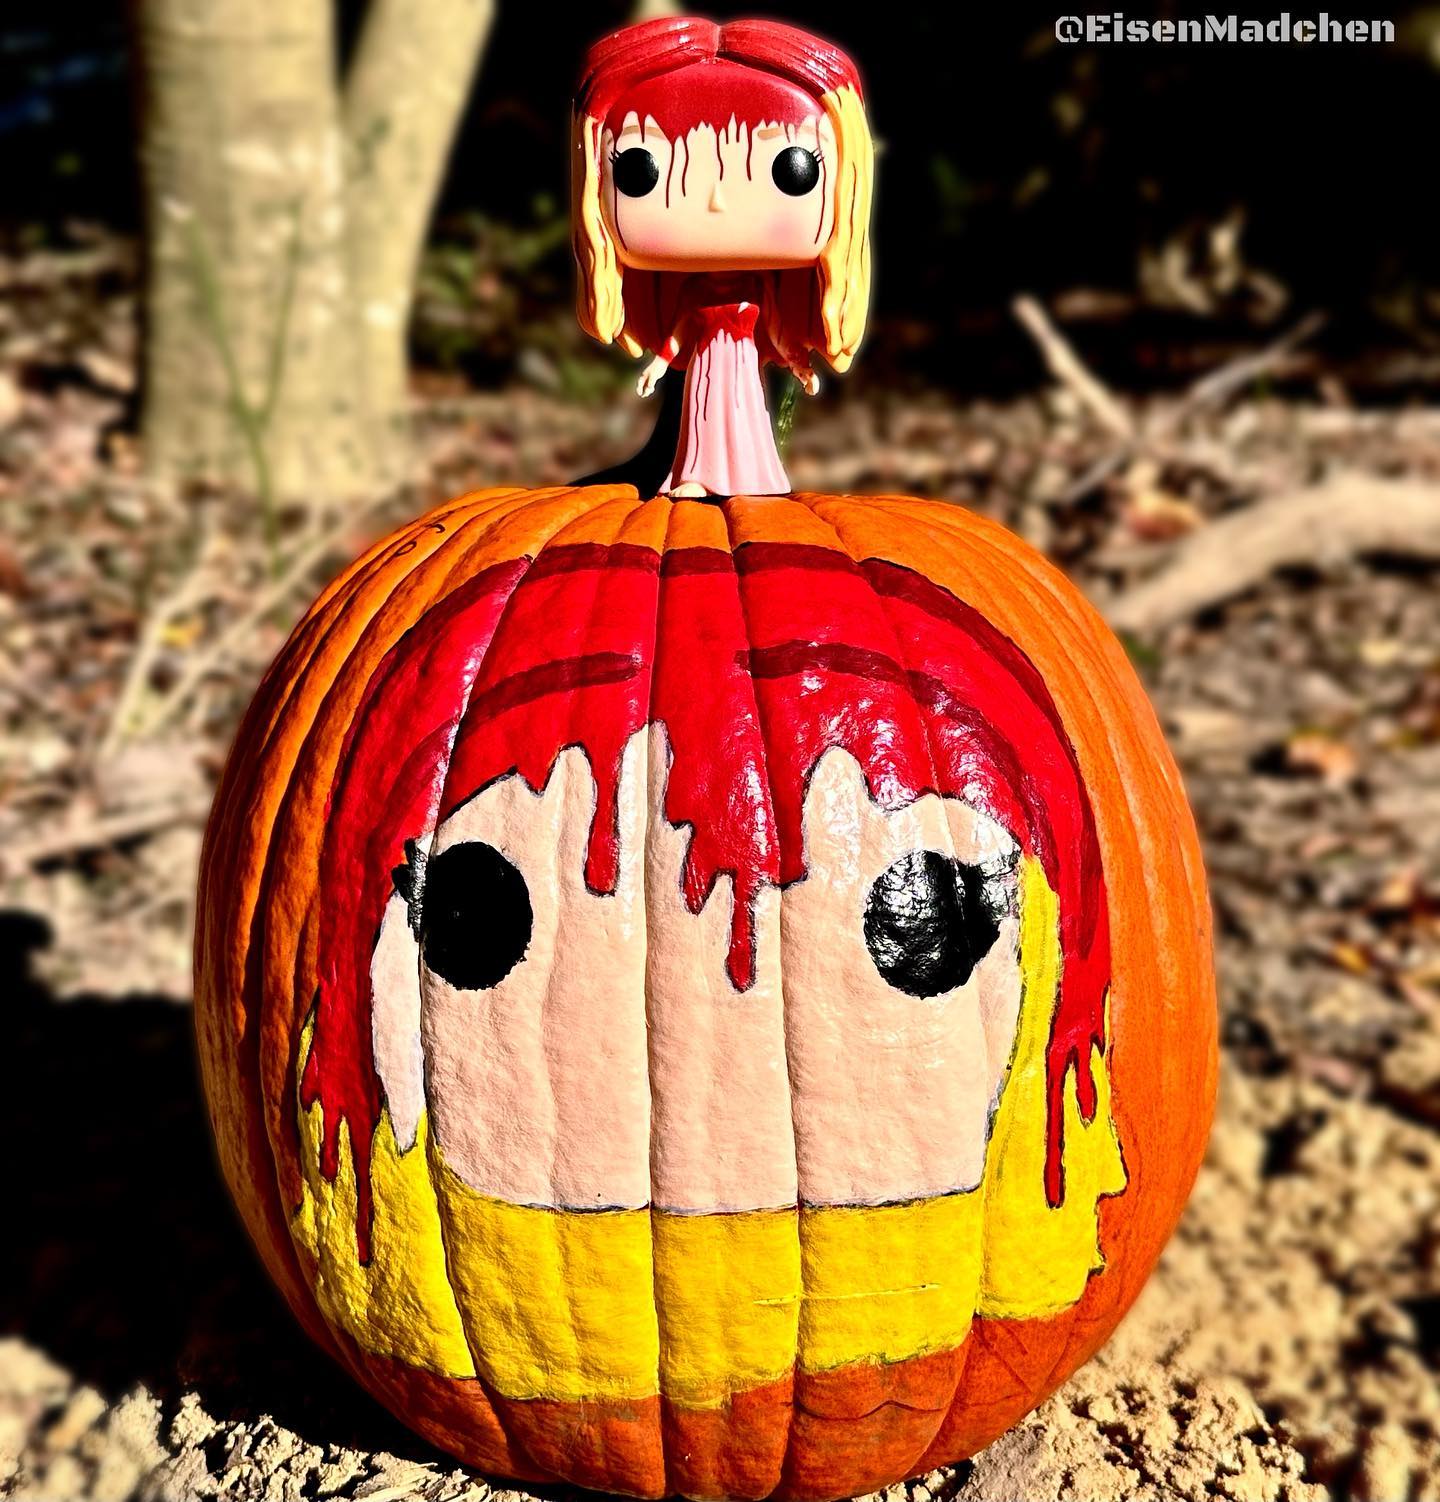 Victoria Conlin's winning pumpkin, Carrie, painted, with Pop! Carrie